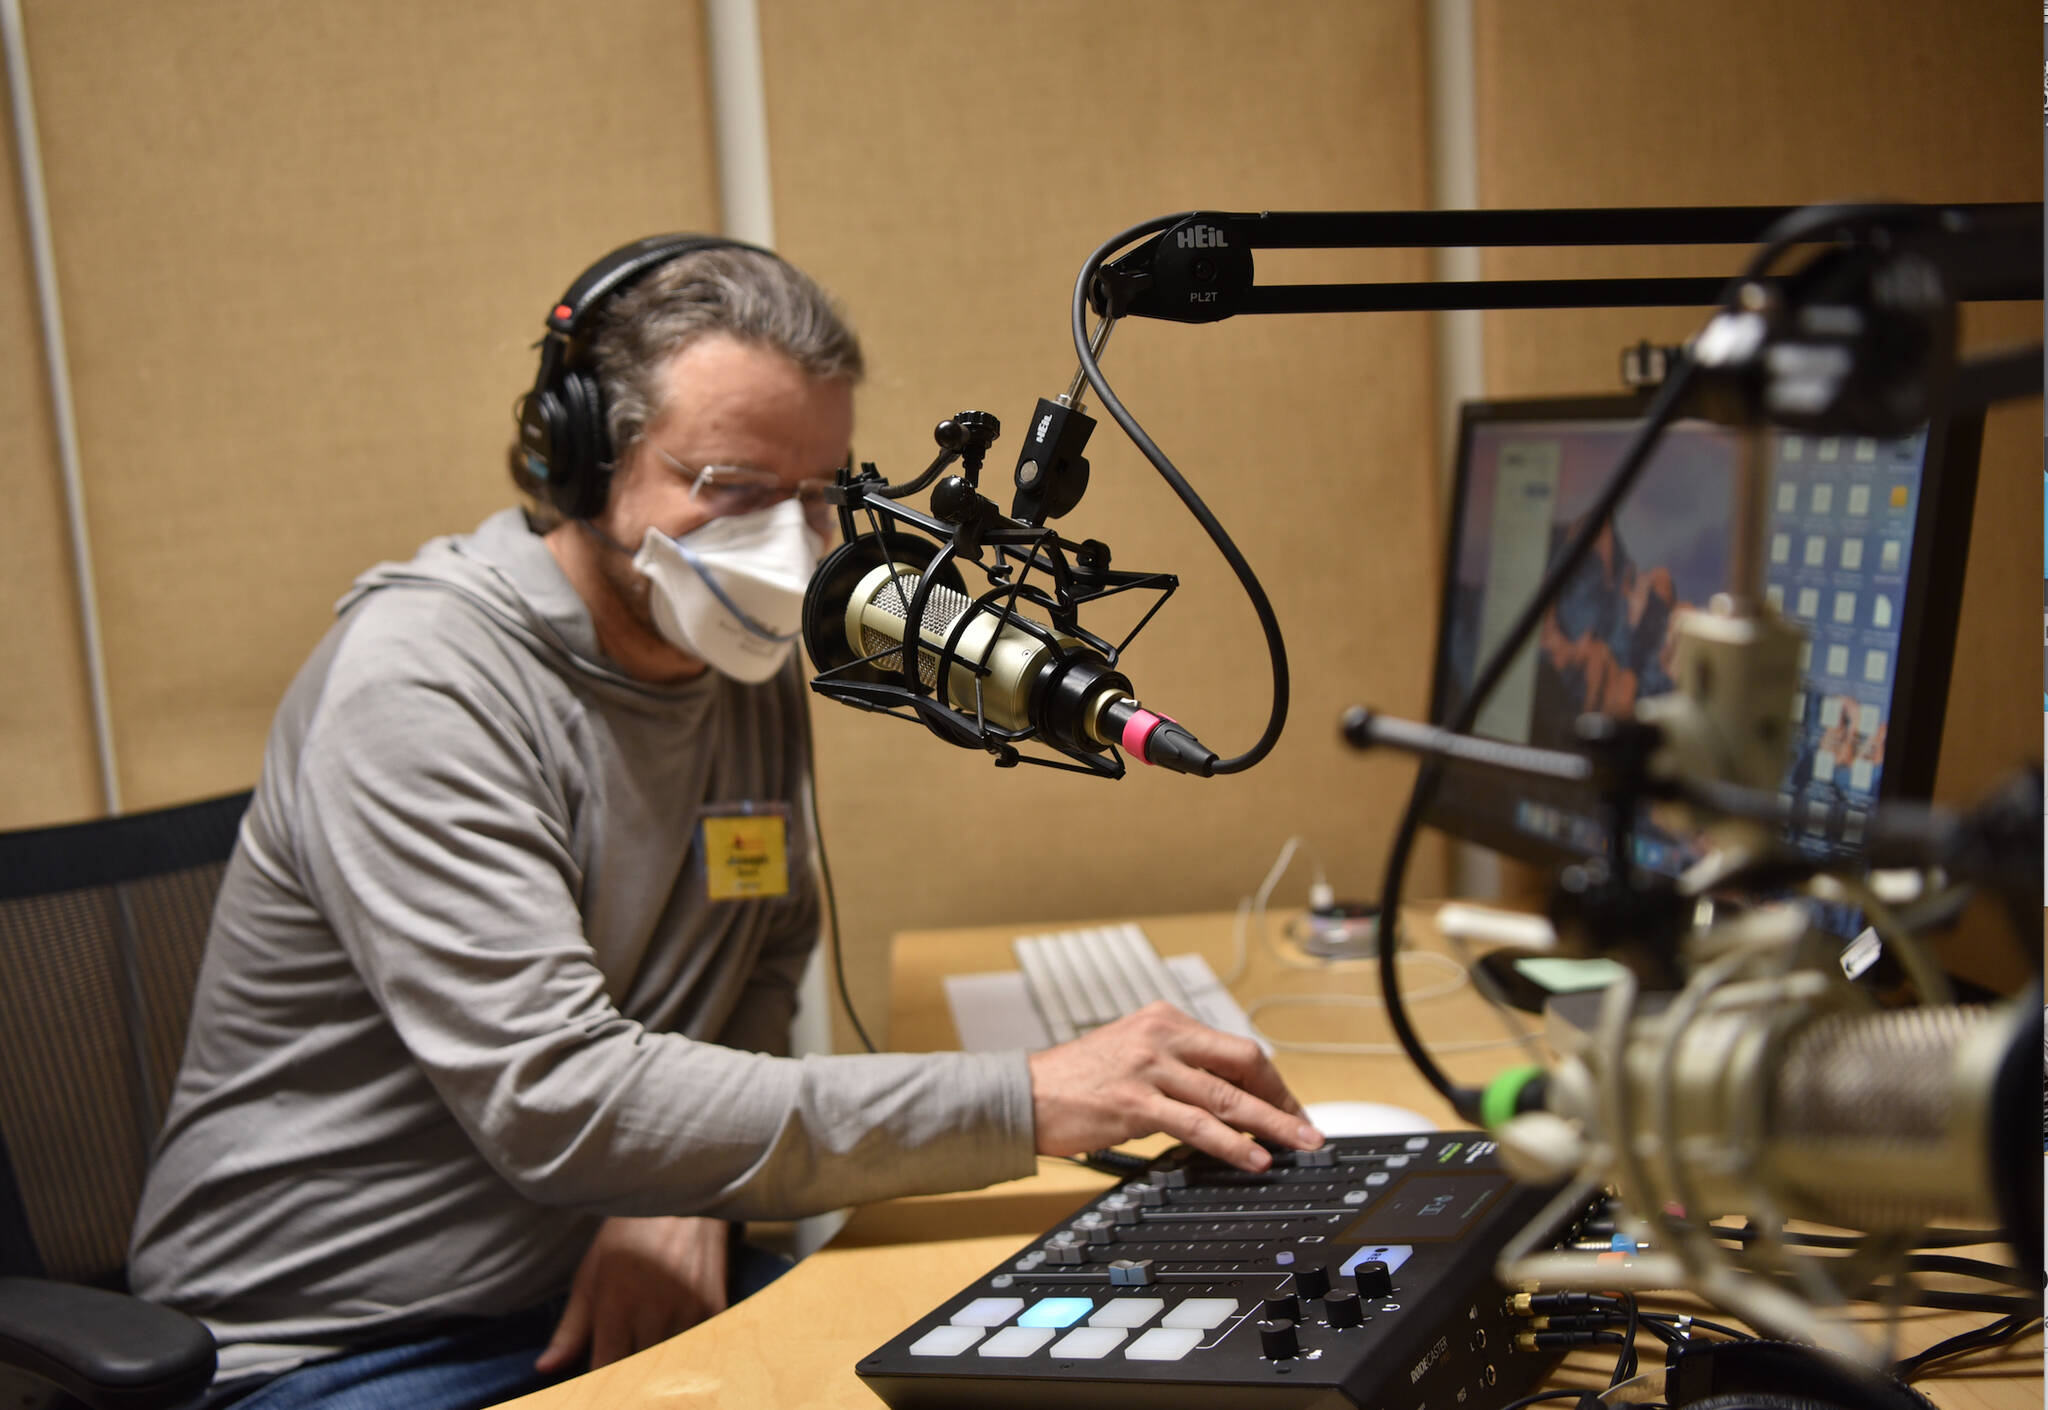 Volunteer Joseph Steck in the Media Arts studio where podcasts are produced.